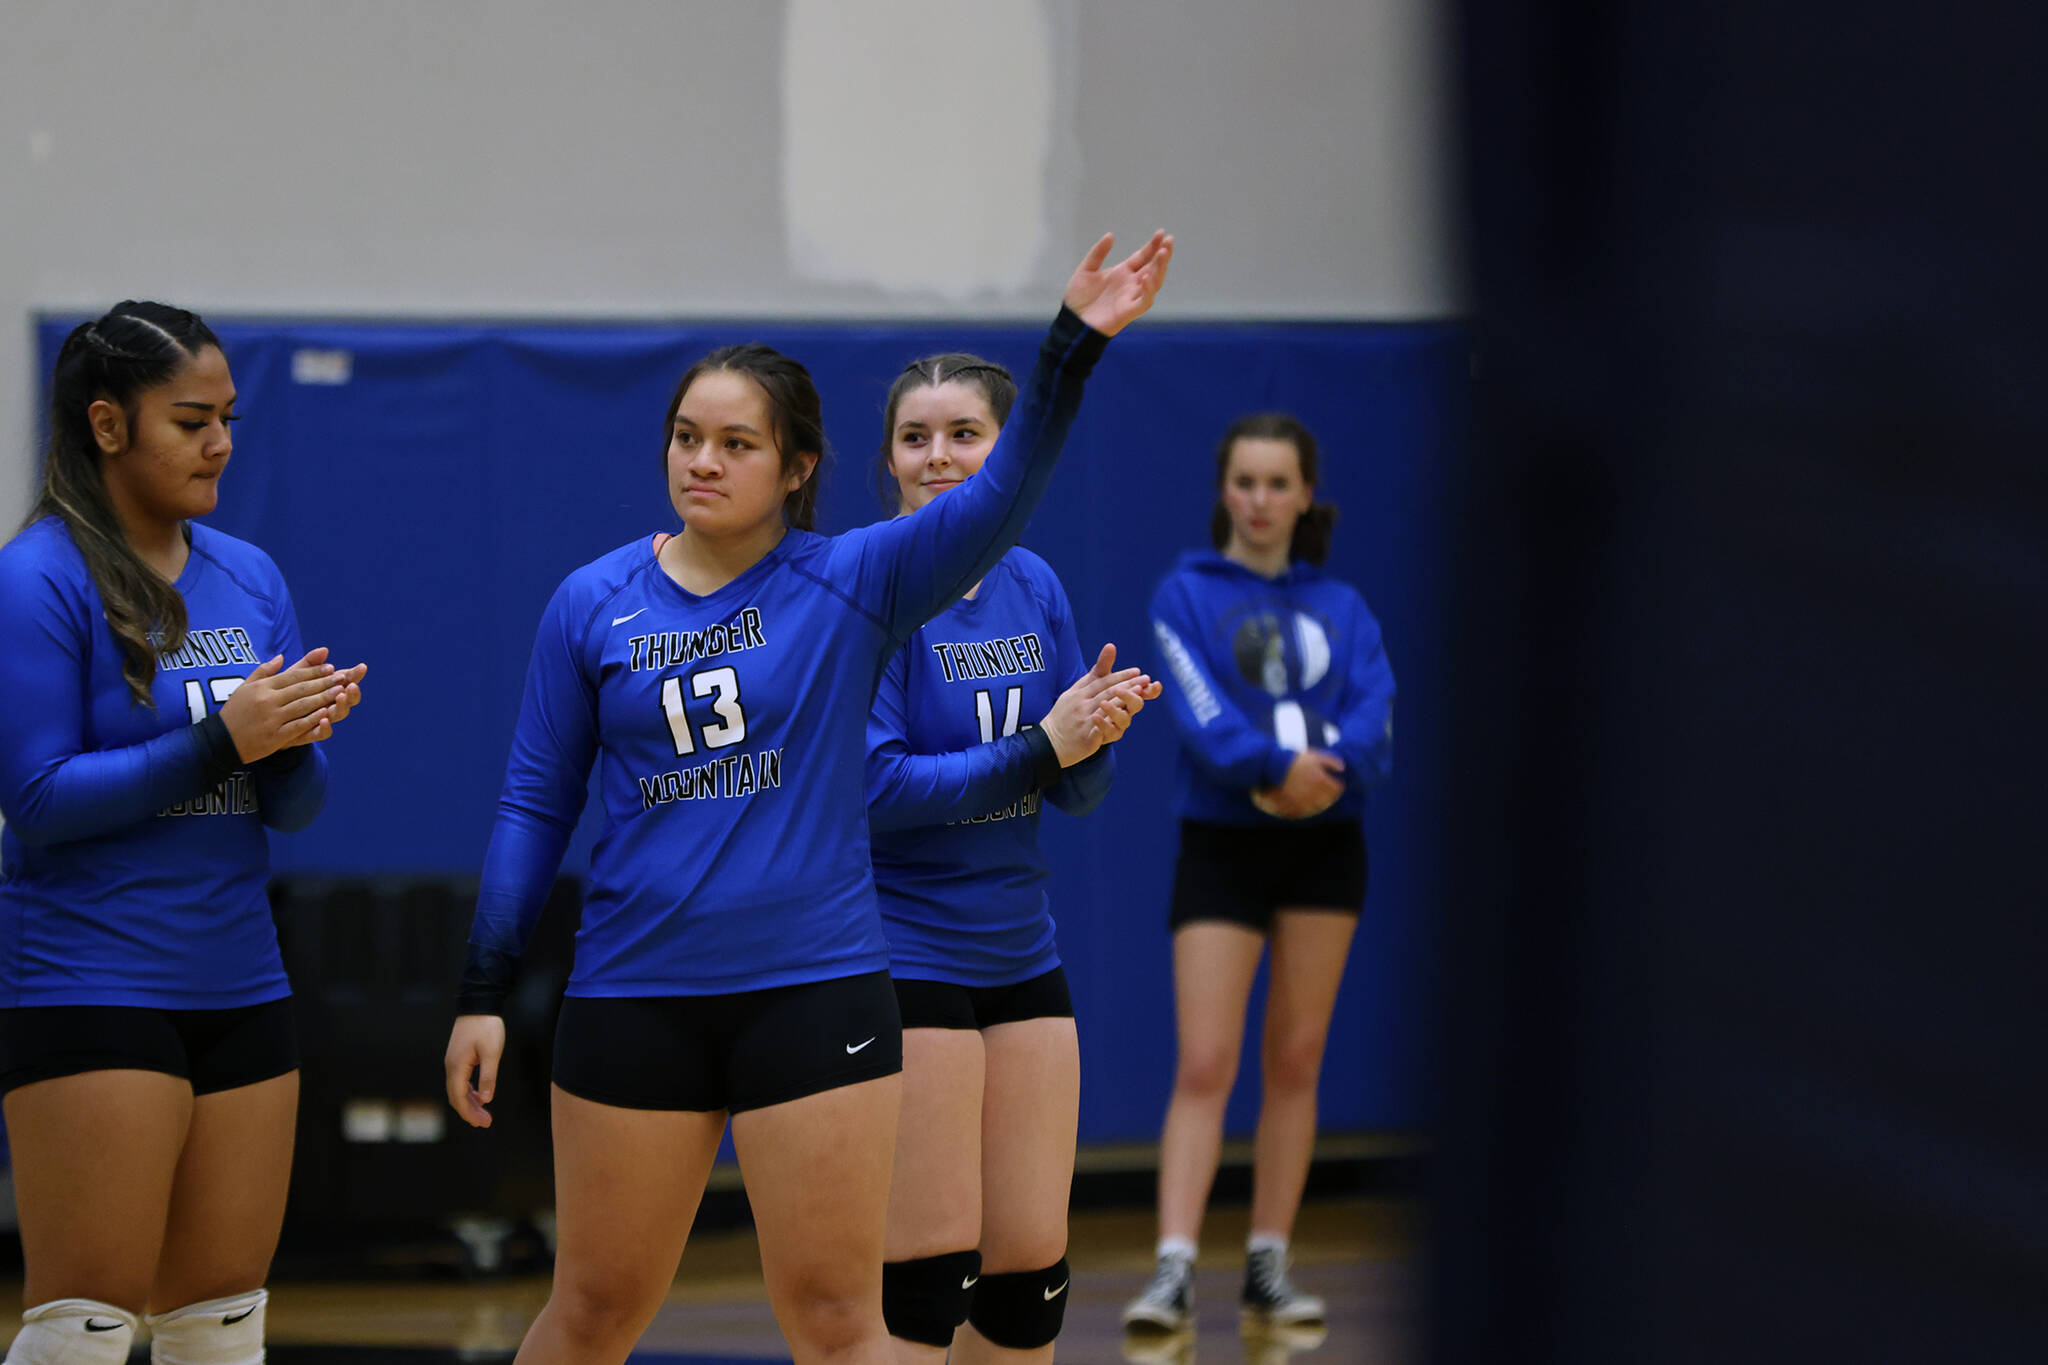 Senior Talita Toutailepo waves to the crowd during introductions before the team’s first match up against the Ketchikan Lady Kings back in early Sept. Over the weekend Toutailepo came up big in THMS’ second face off against the Lady Kings. (Ben Hohenstatt / Juneau Empire File)